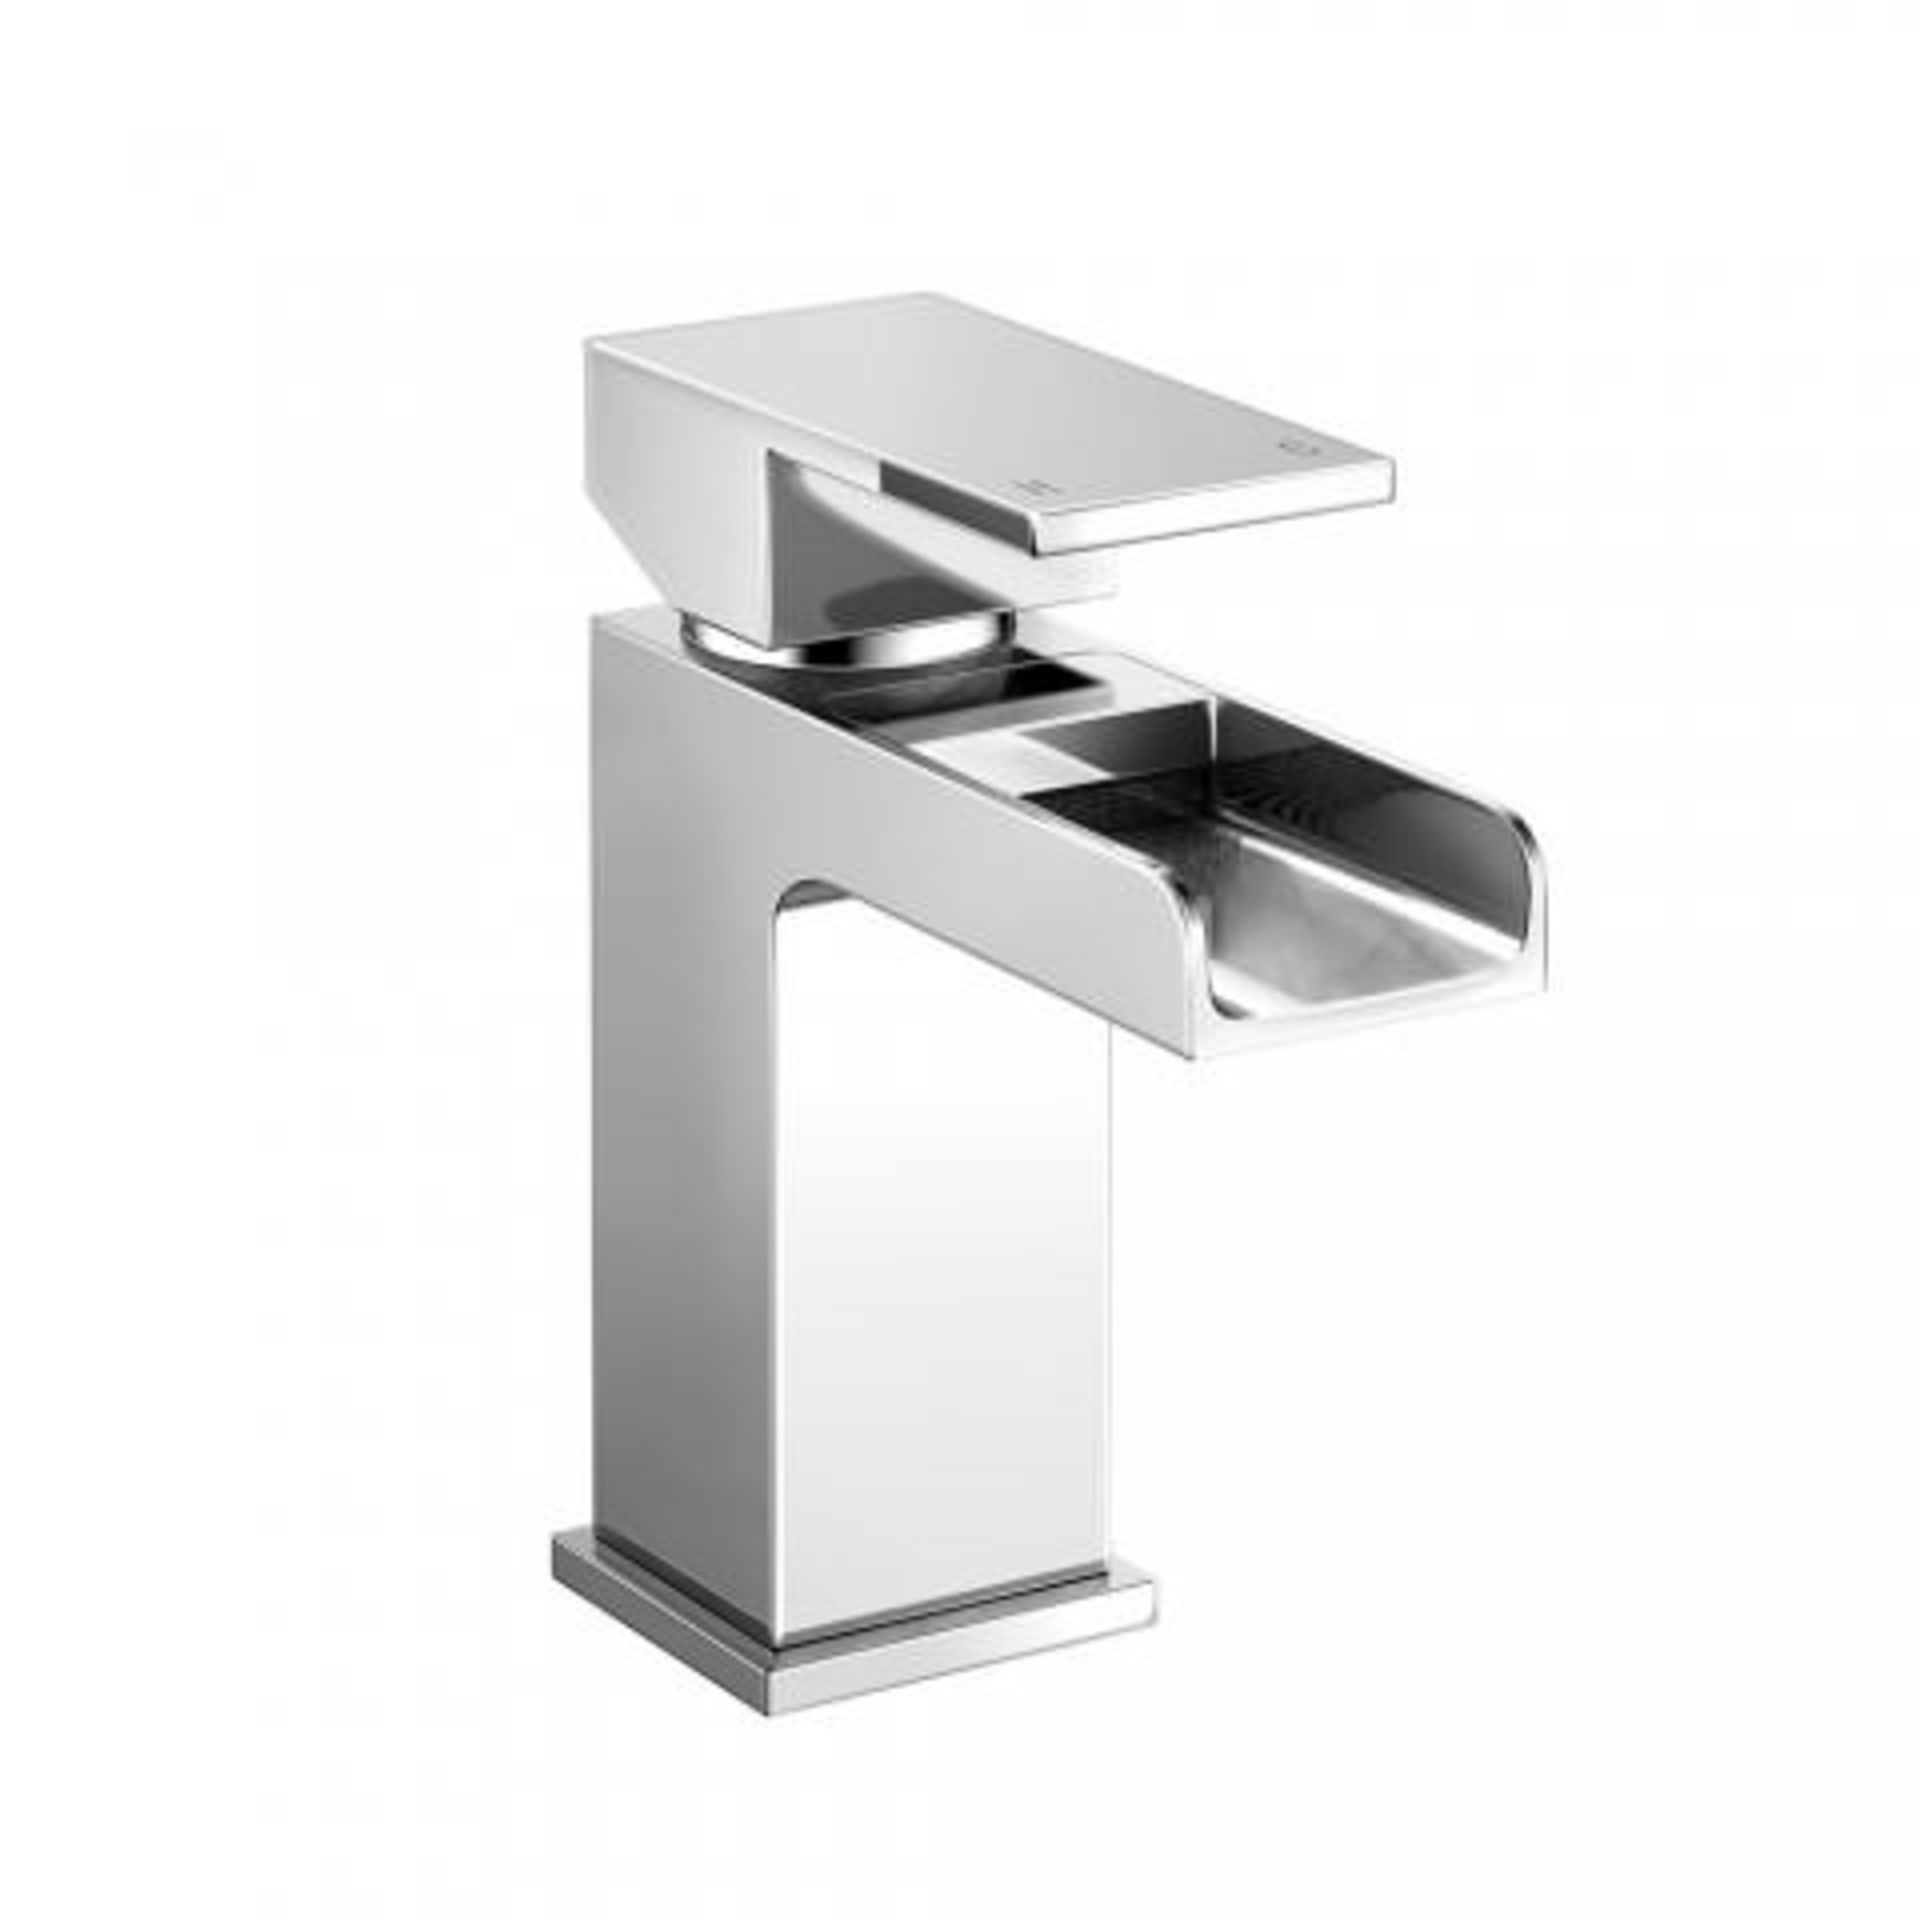 (A32) Niagra II Basin Mixer Tap Waterfall Feature Our range of waterfall taps add a contemporary - Image 2 of 3